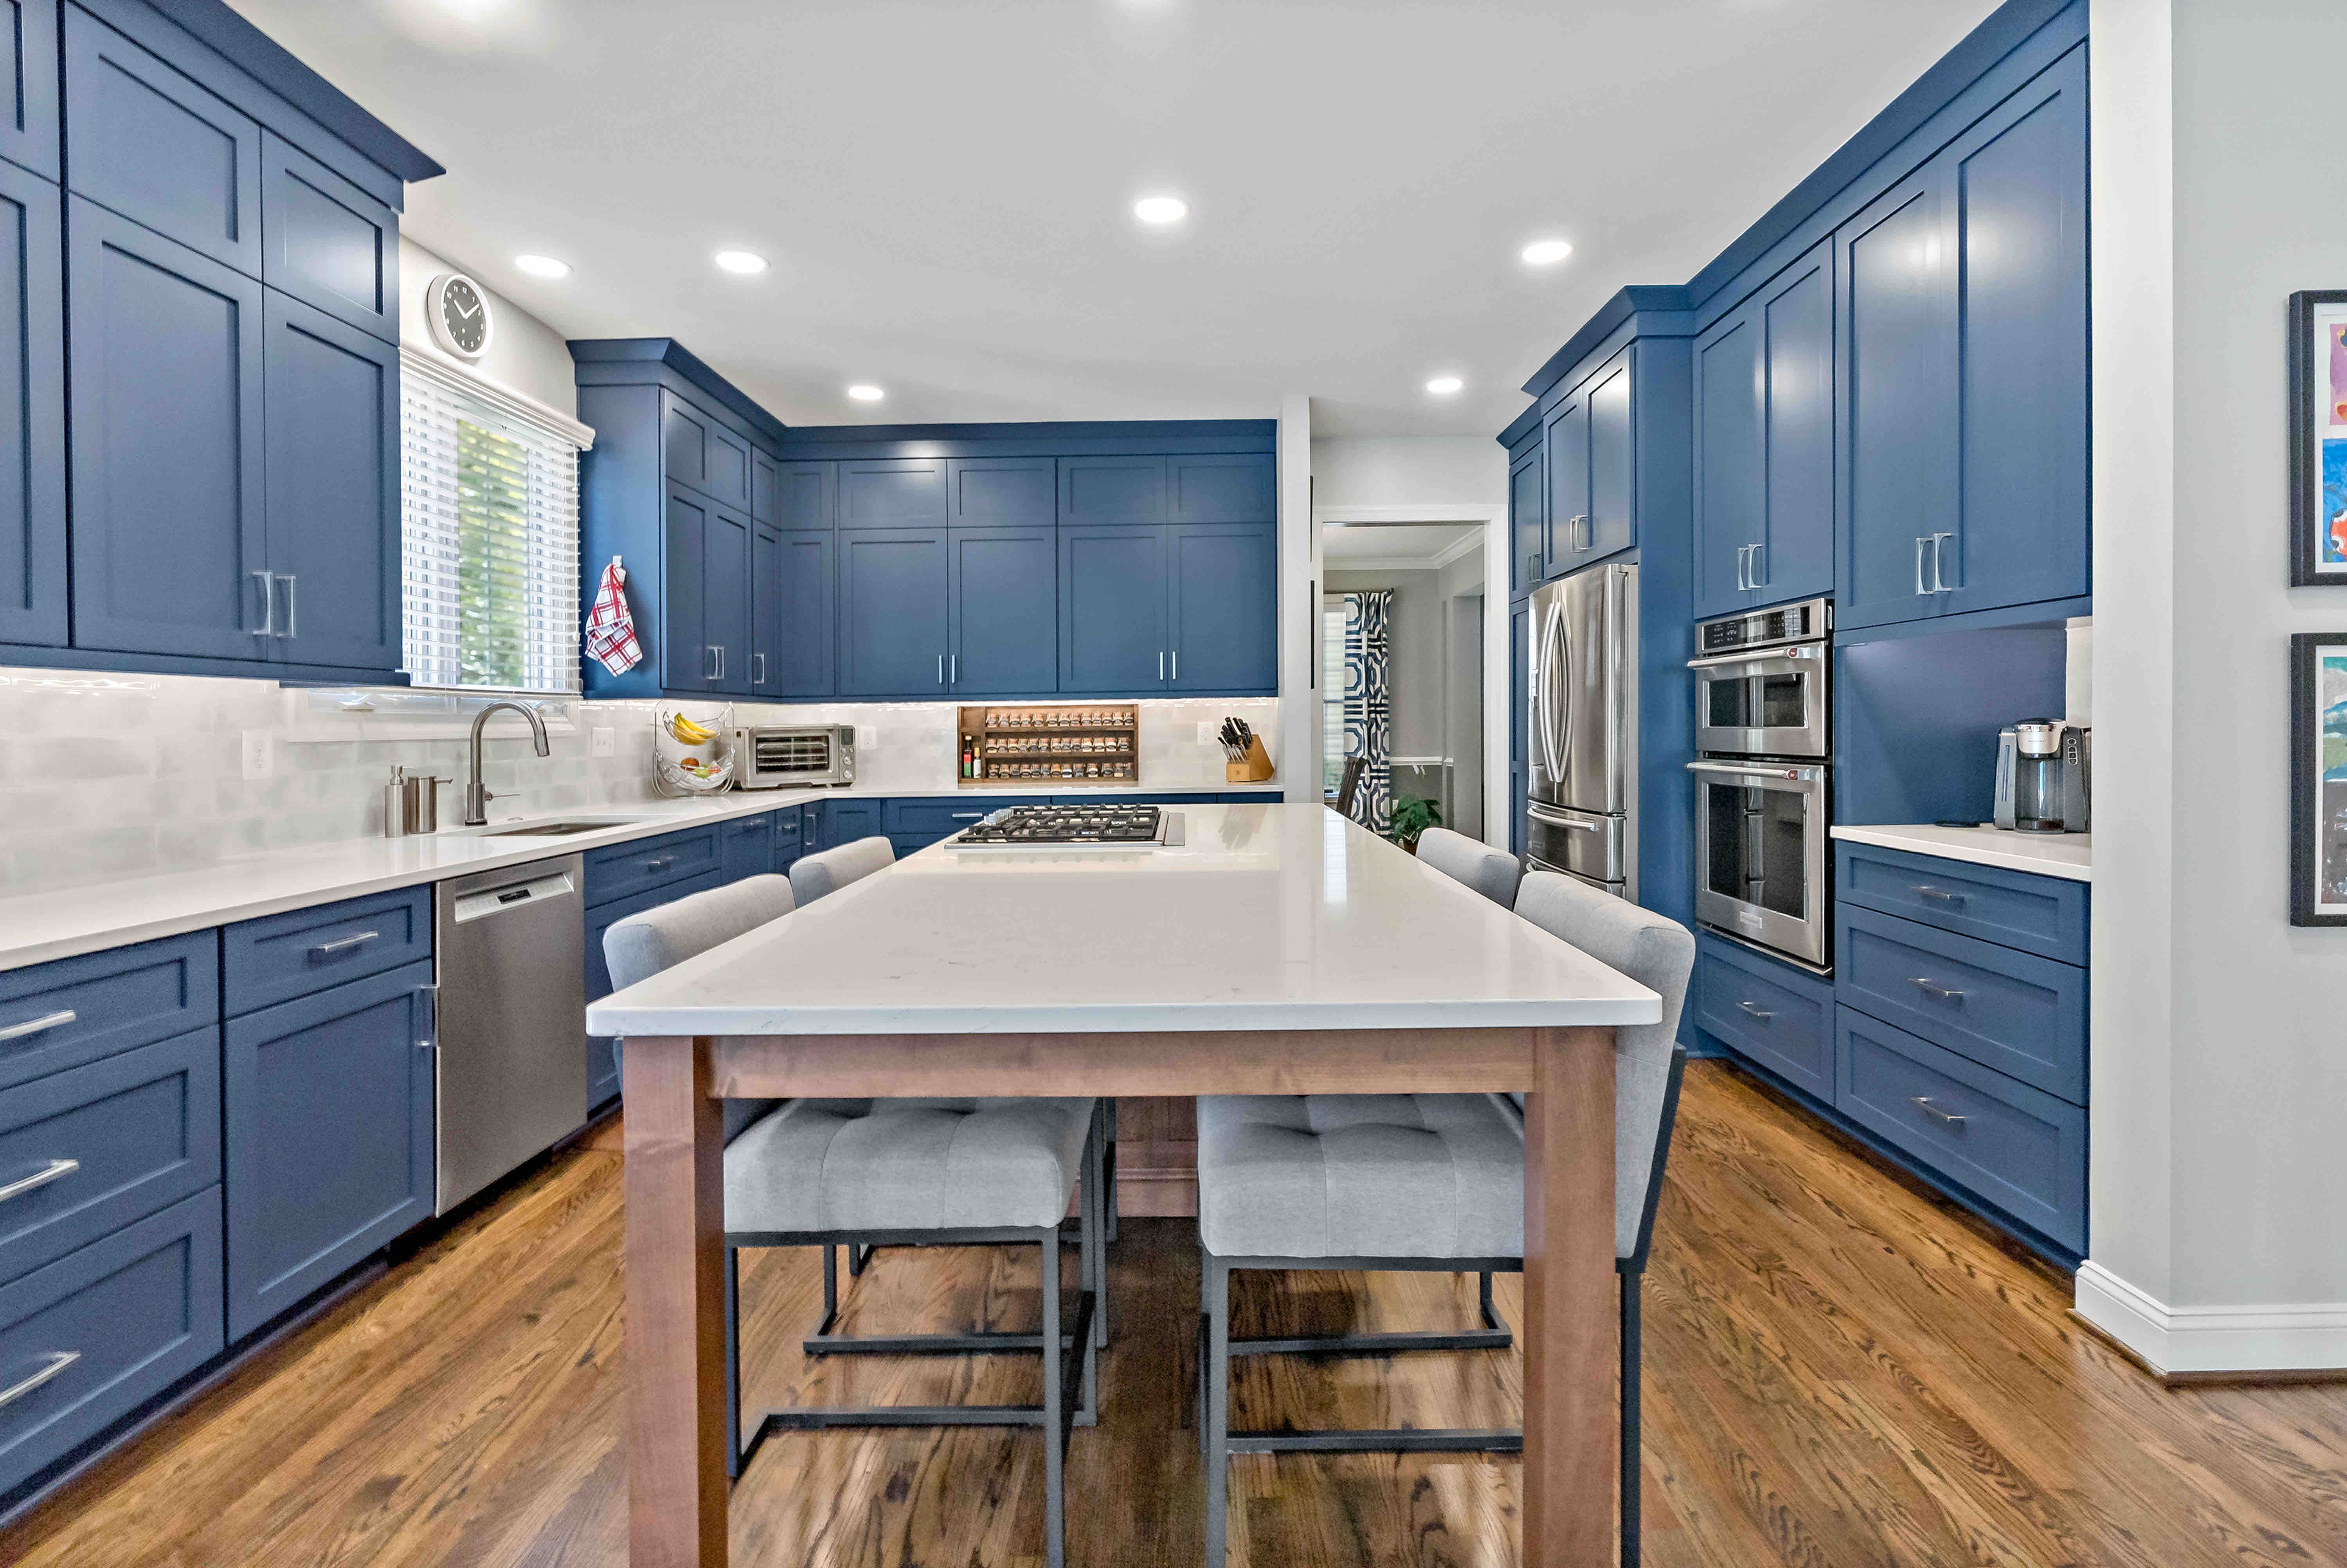 White countertop kitchen island with seating in blue kitchen